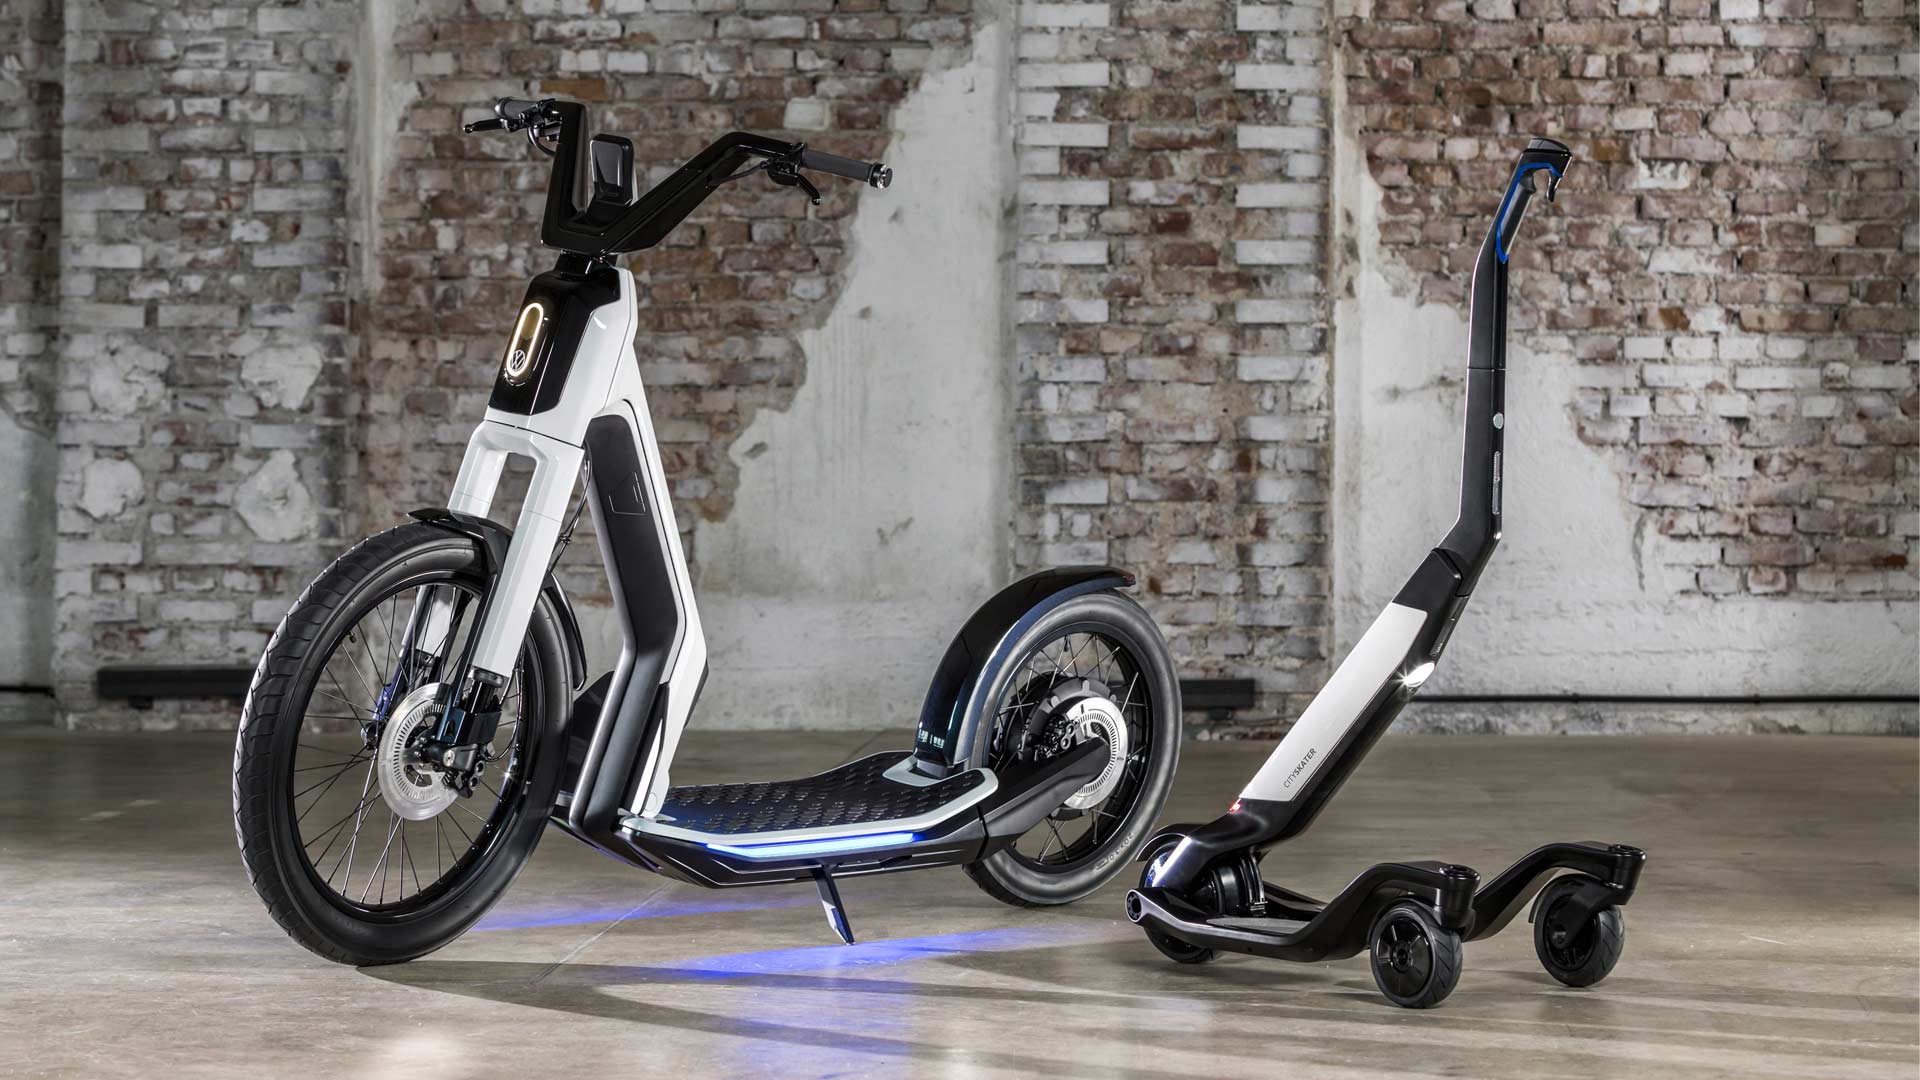 Volkswagen I.D. Streetmate and I.D. Cityskater electric scooters